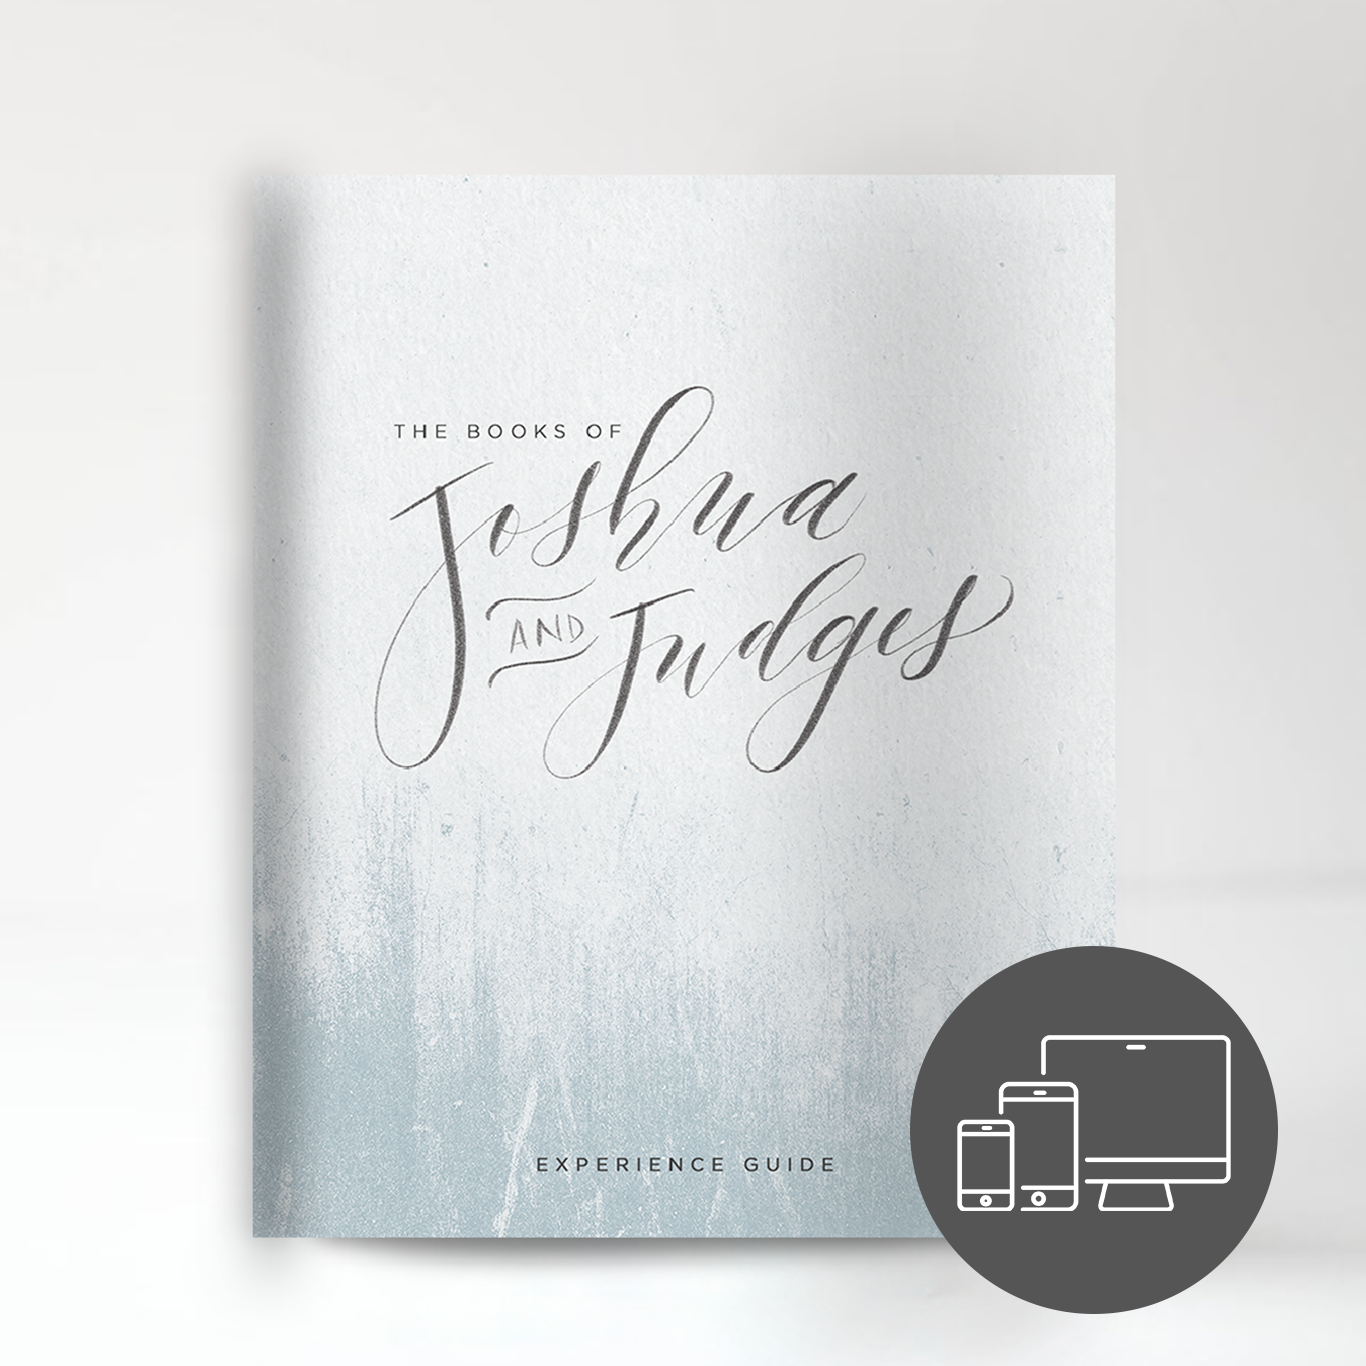 The Books of Joshua & Judges Experience Guide (Digital Version)